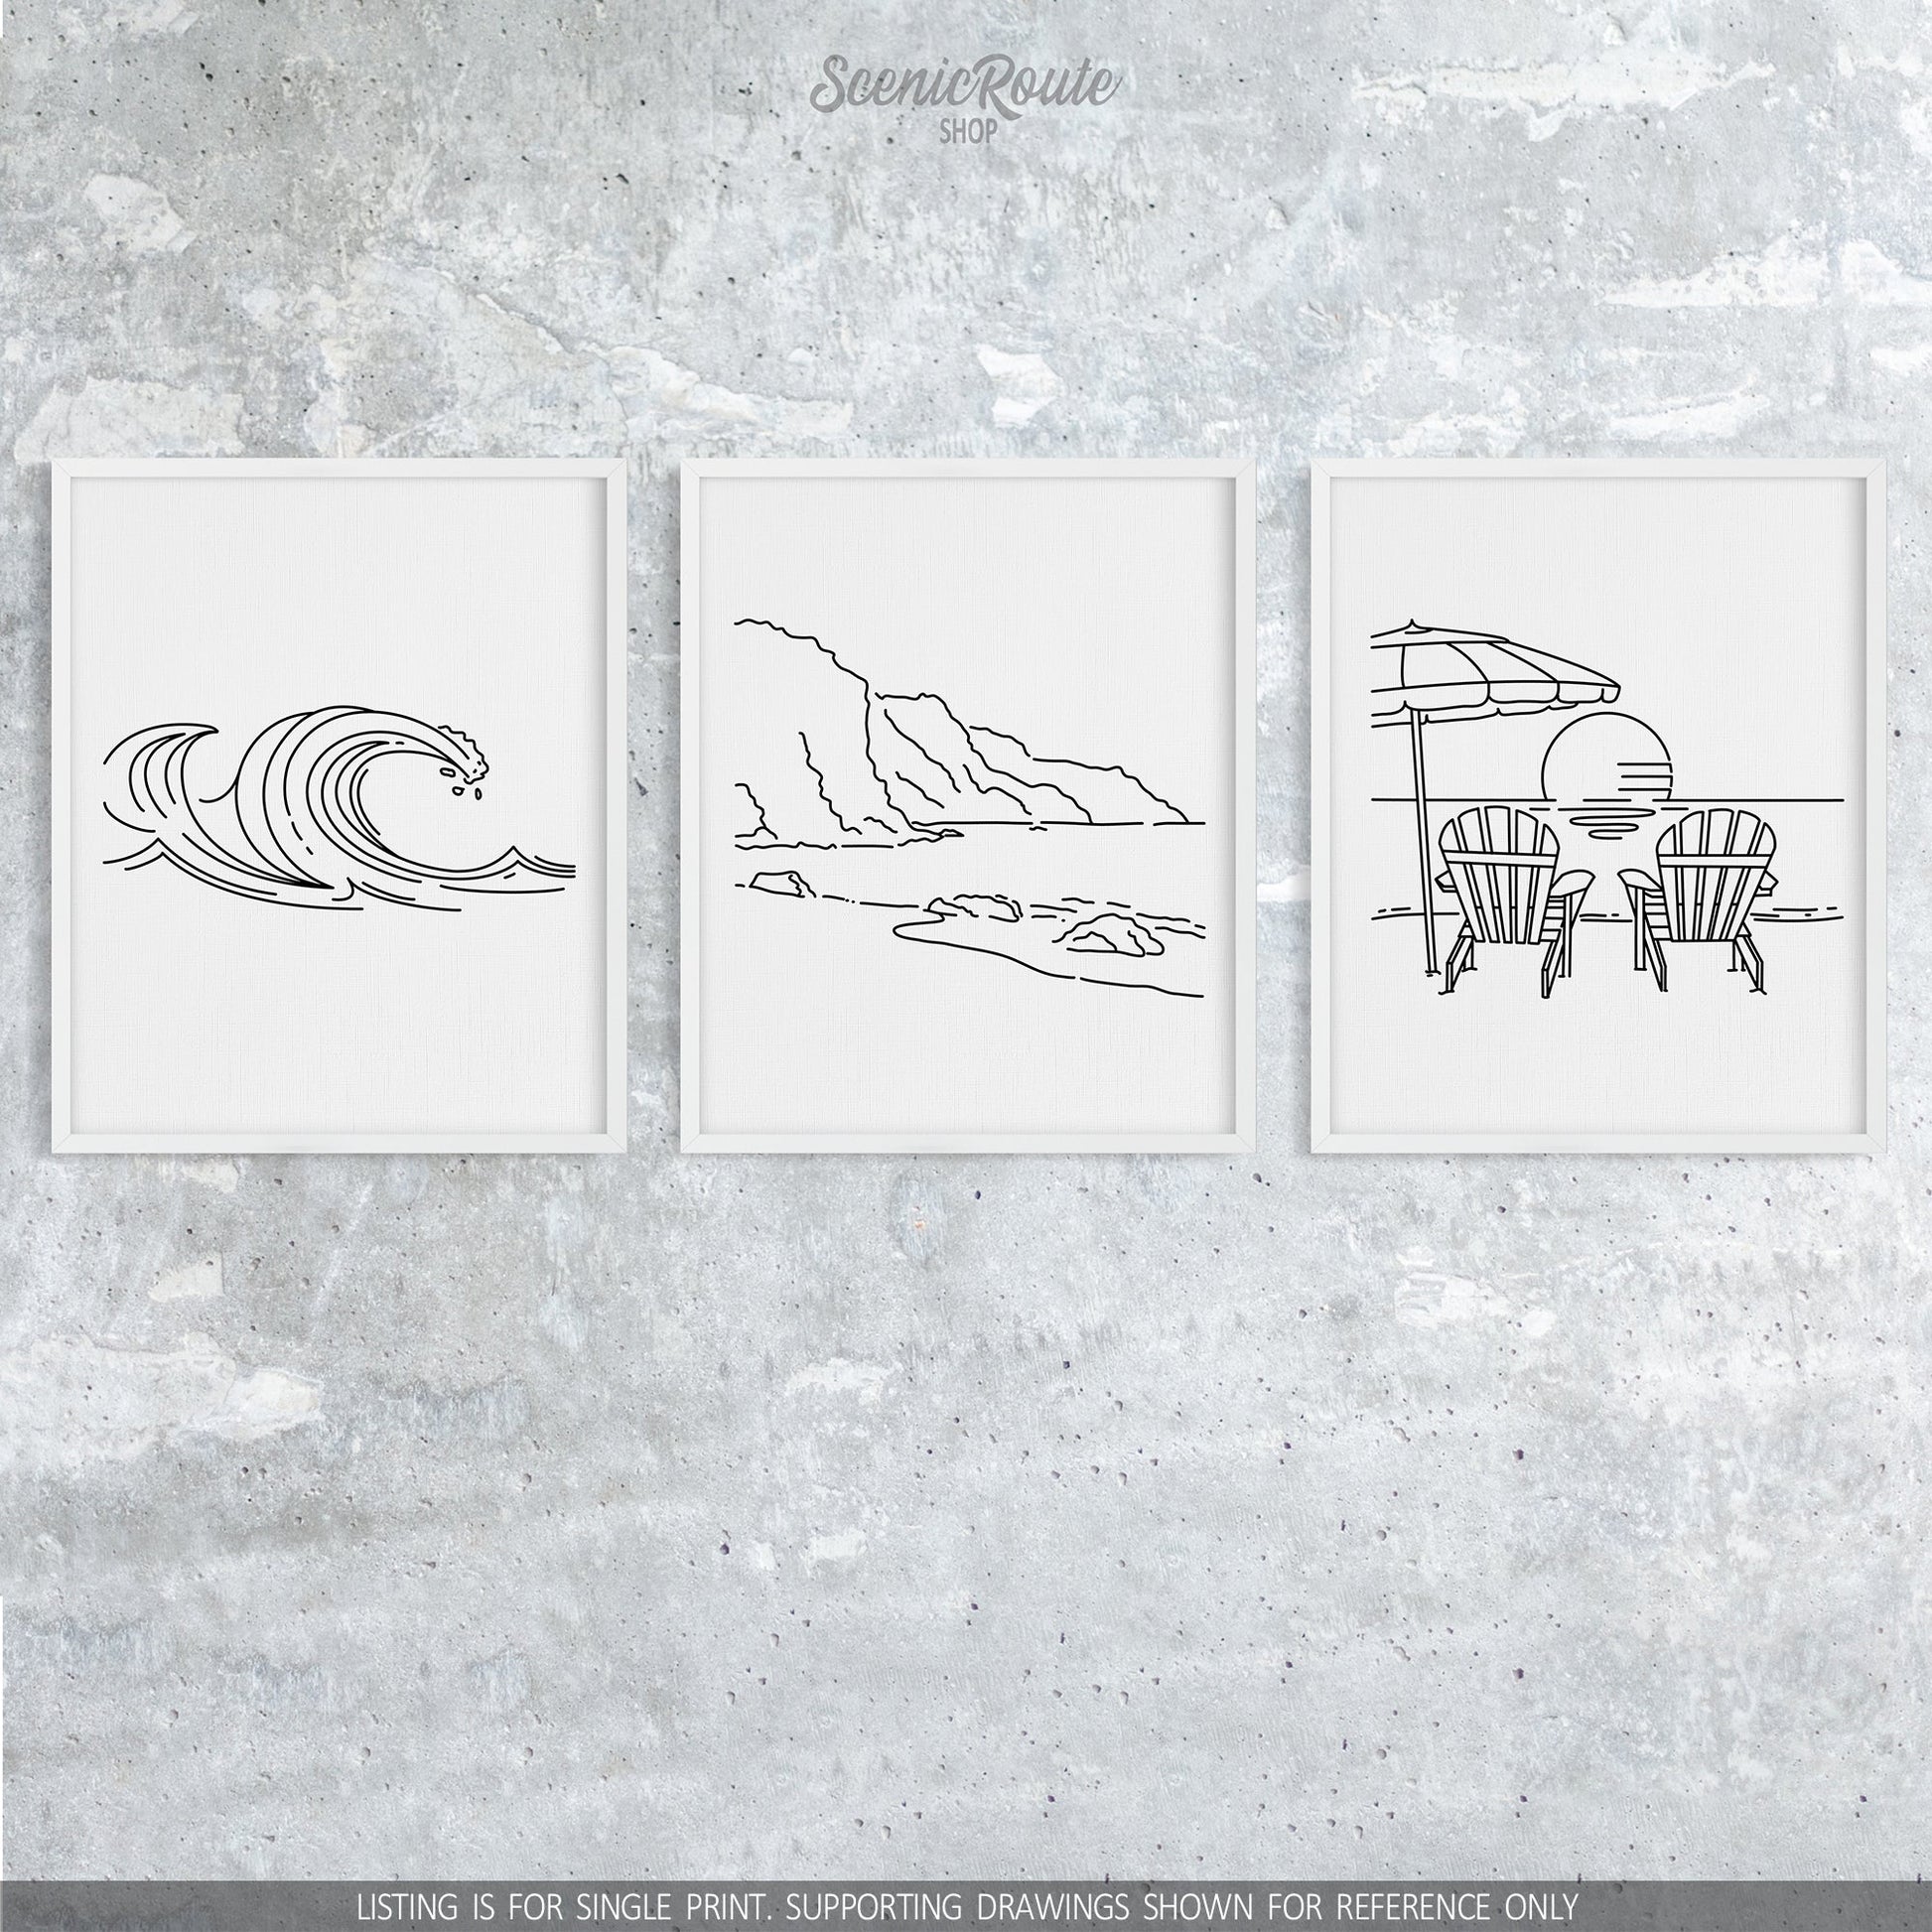 A group of three framed drawings on a concrete wall. The line art drawings include  Waves, the NaPali Coast, and Adirondack Beach Chairs